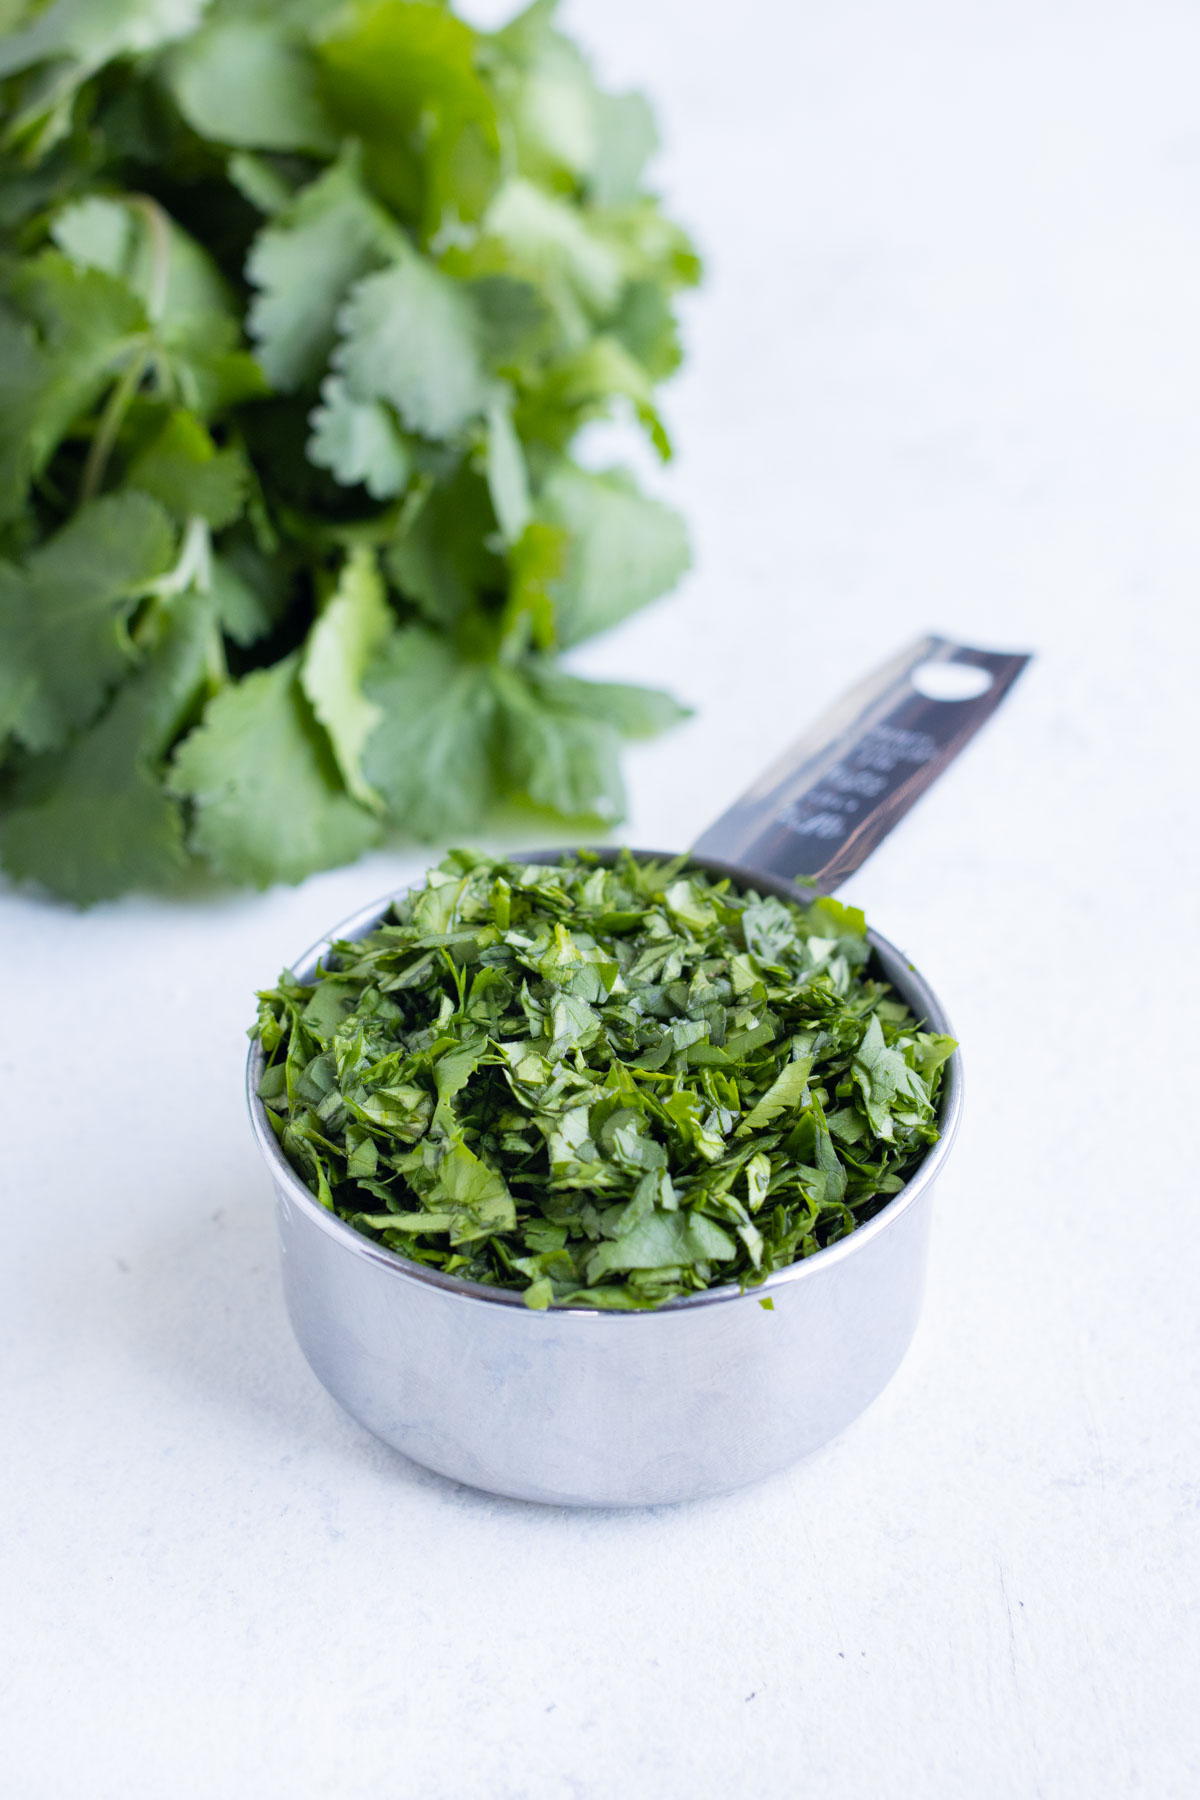 Cilantro is measured in a cup.